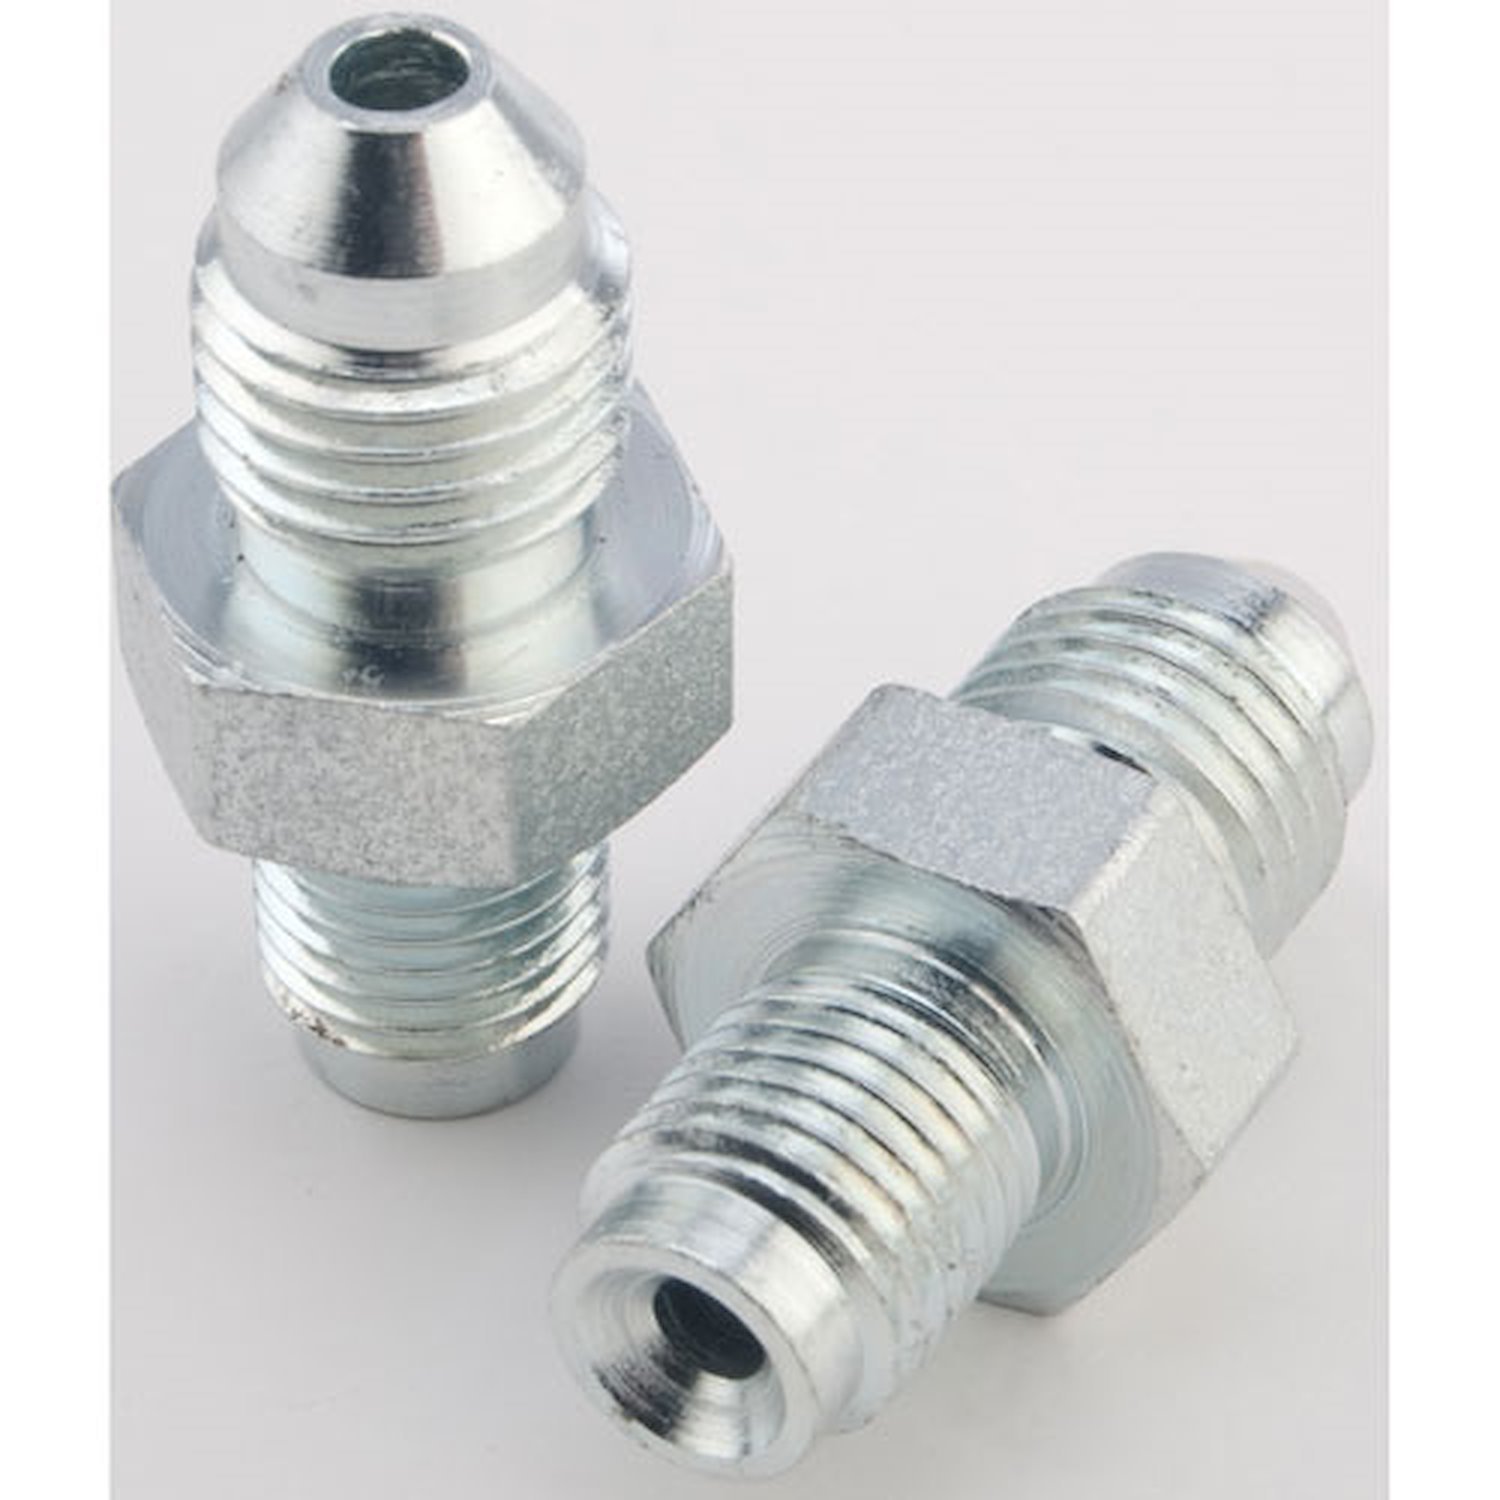 AN to Inverted Flare Male Brake Adapter Fittings [-4 AN x 3/8 in.-24 Male Inverted Flare]